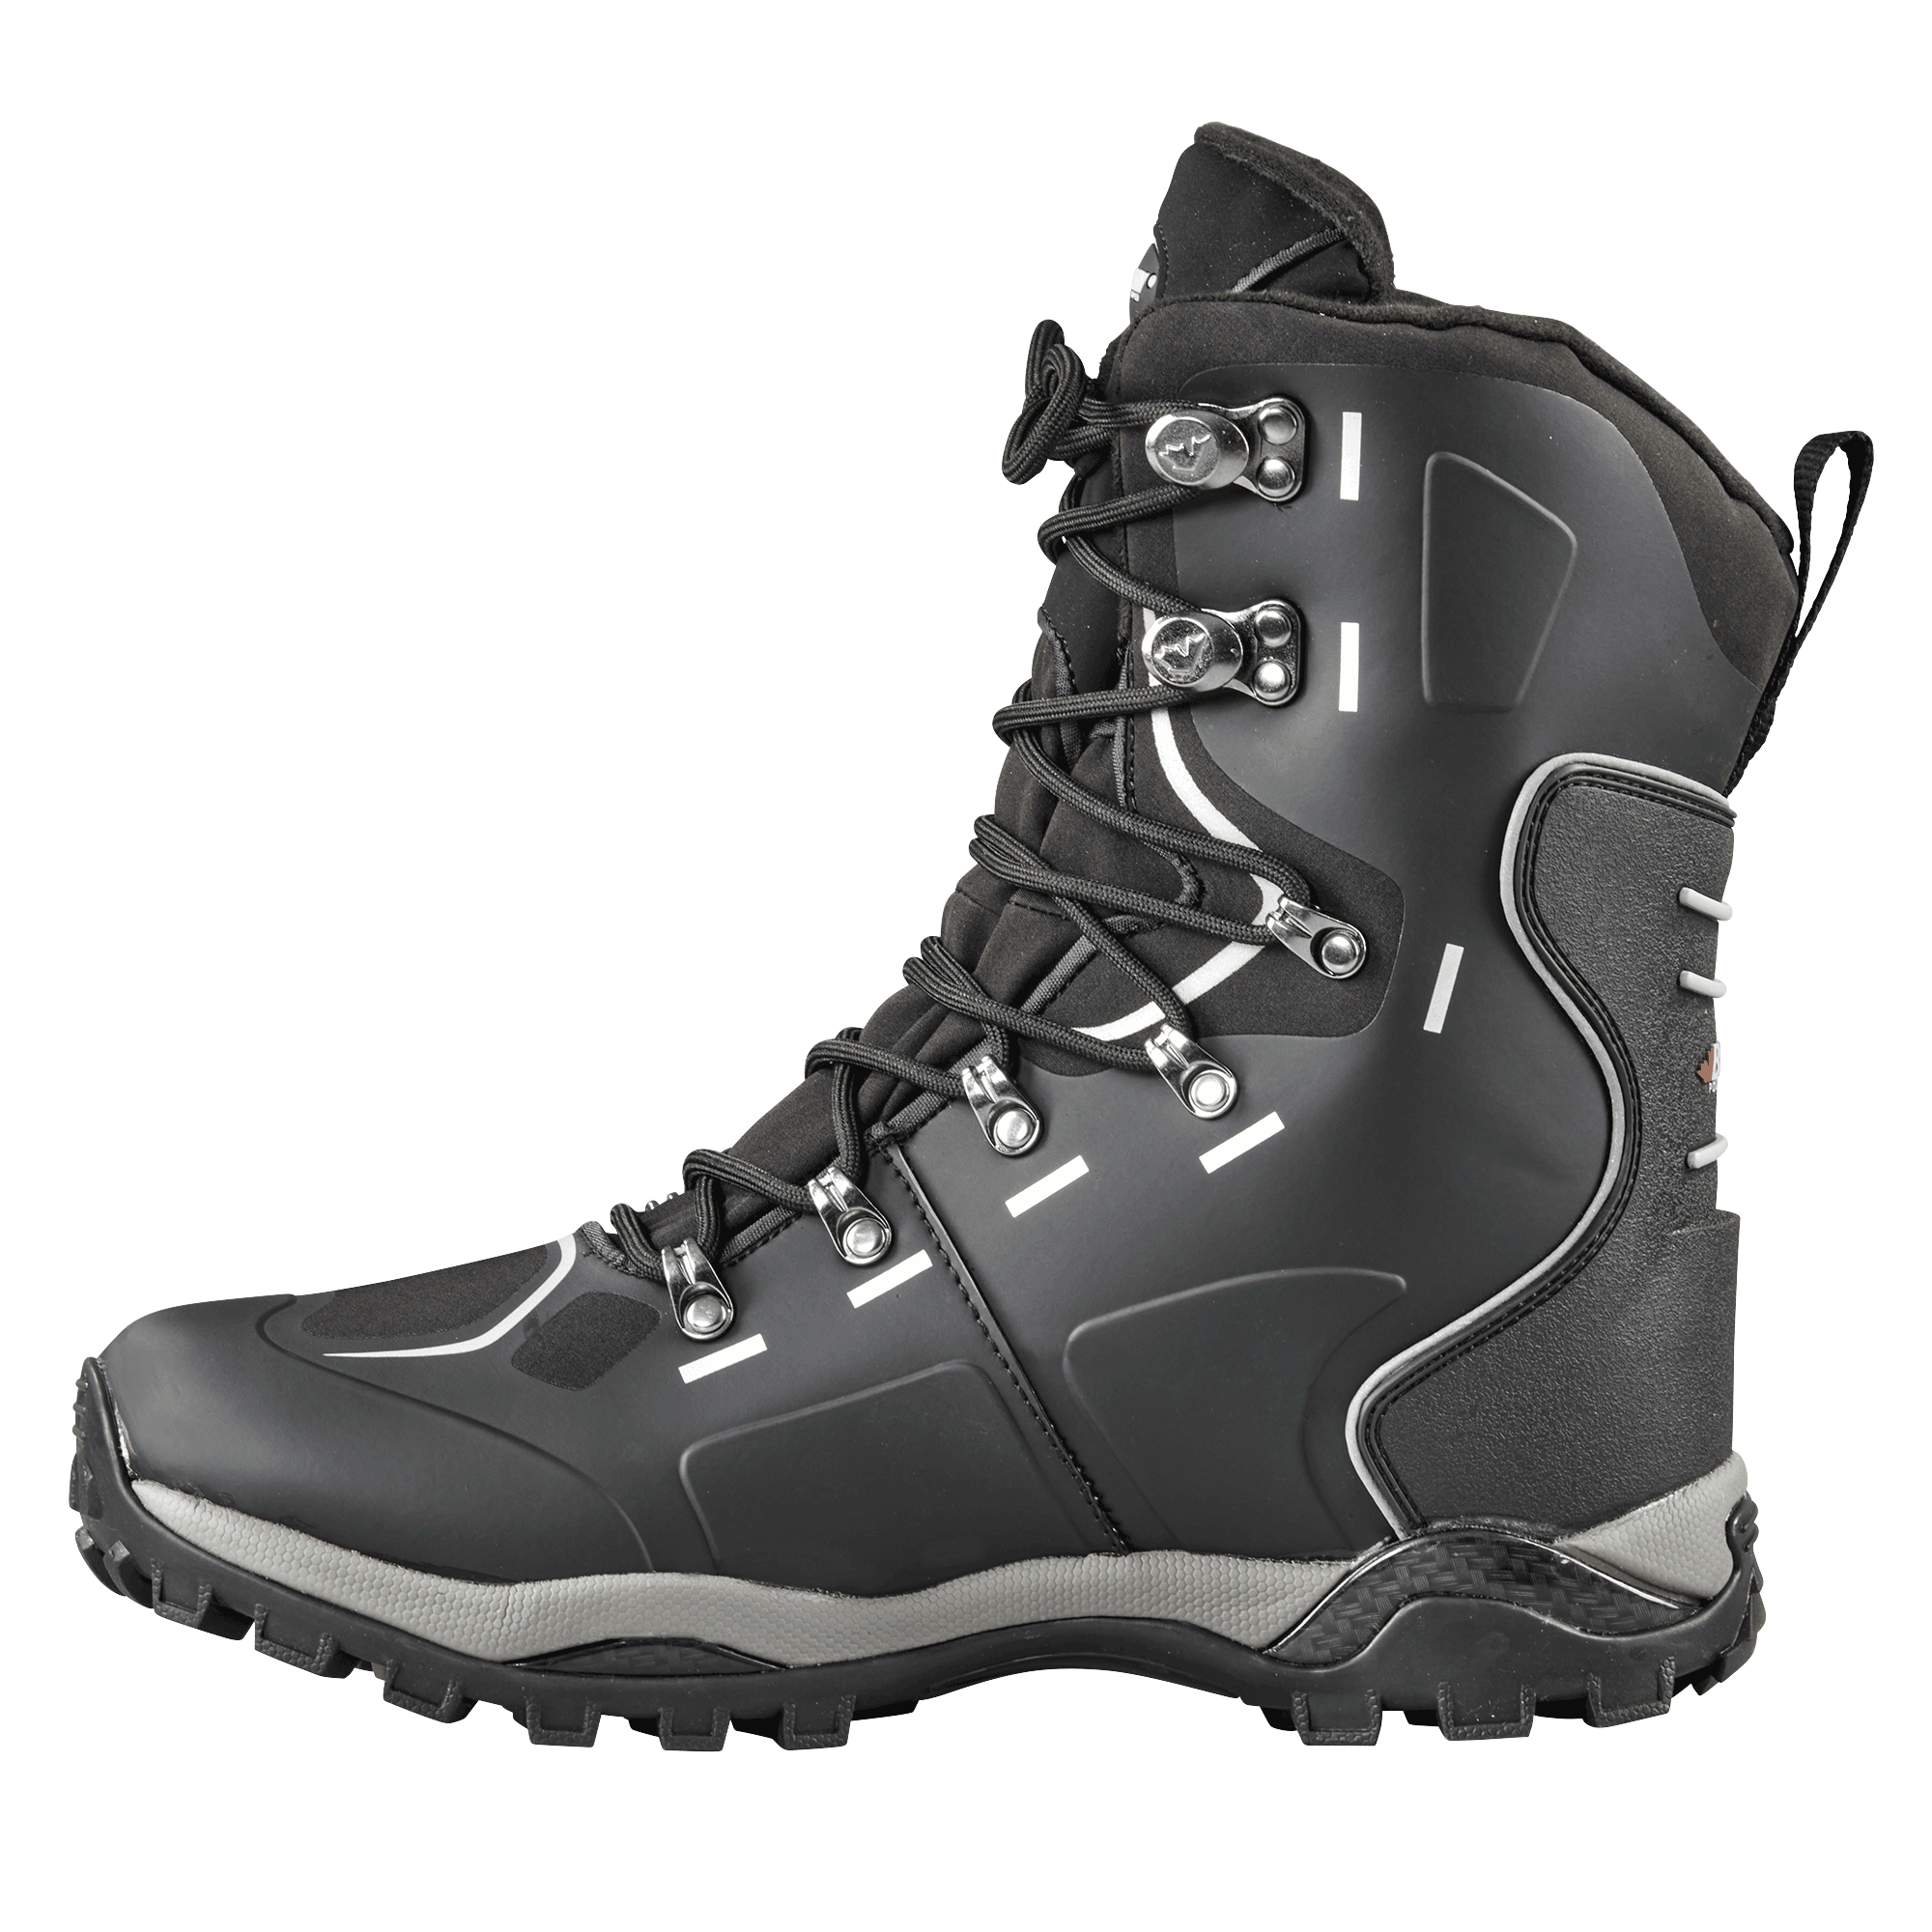 SNOSTORM | Men's Boot – Baffin - Born in the North '79